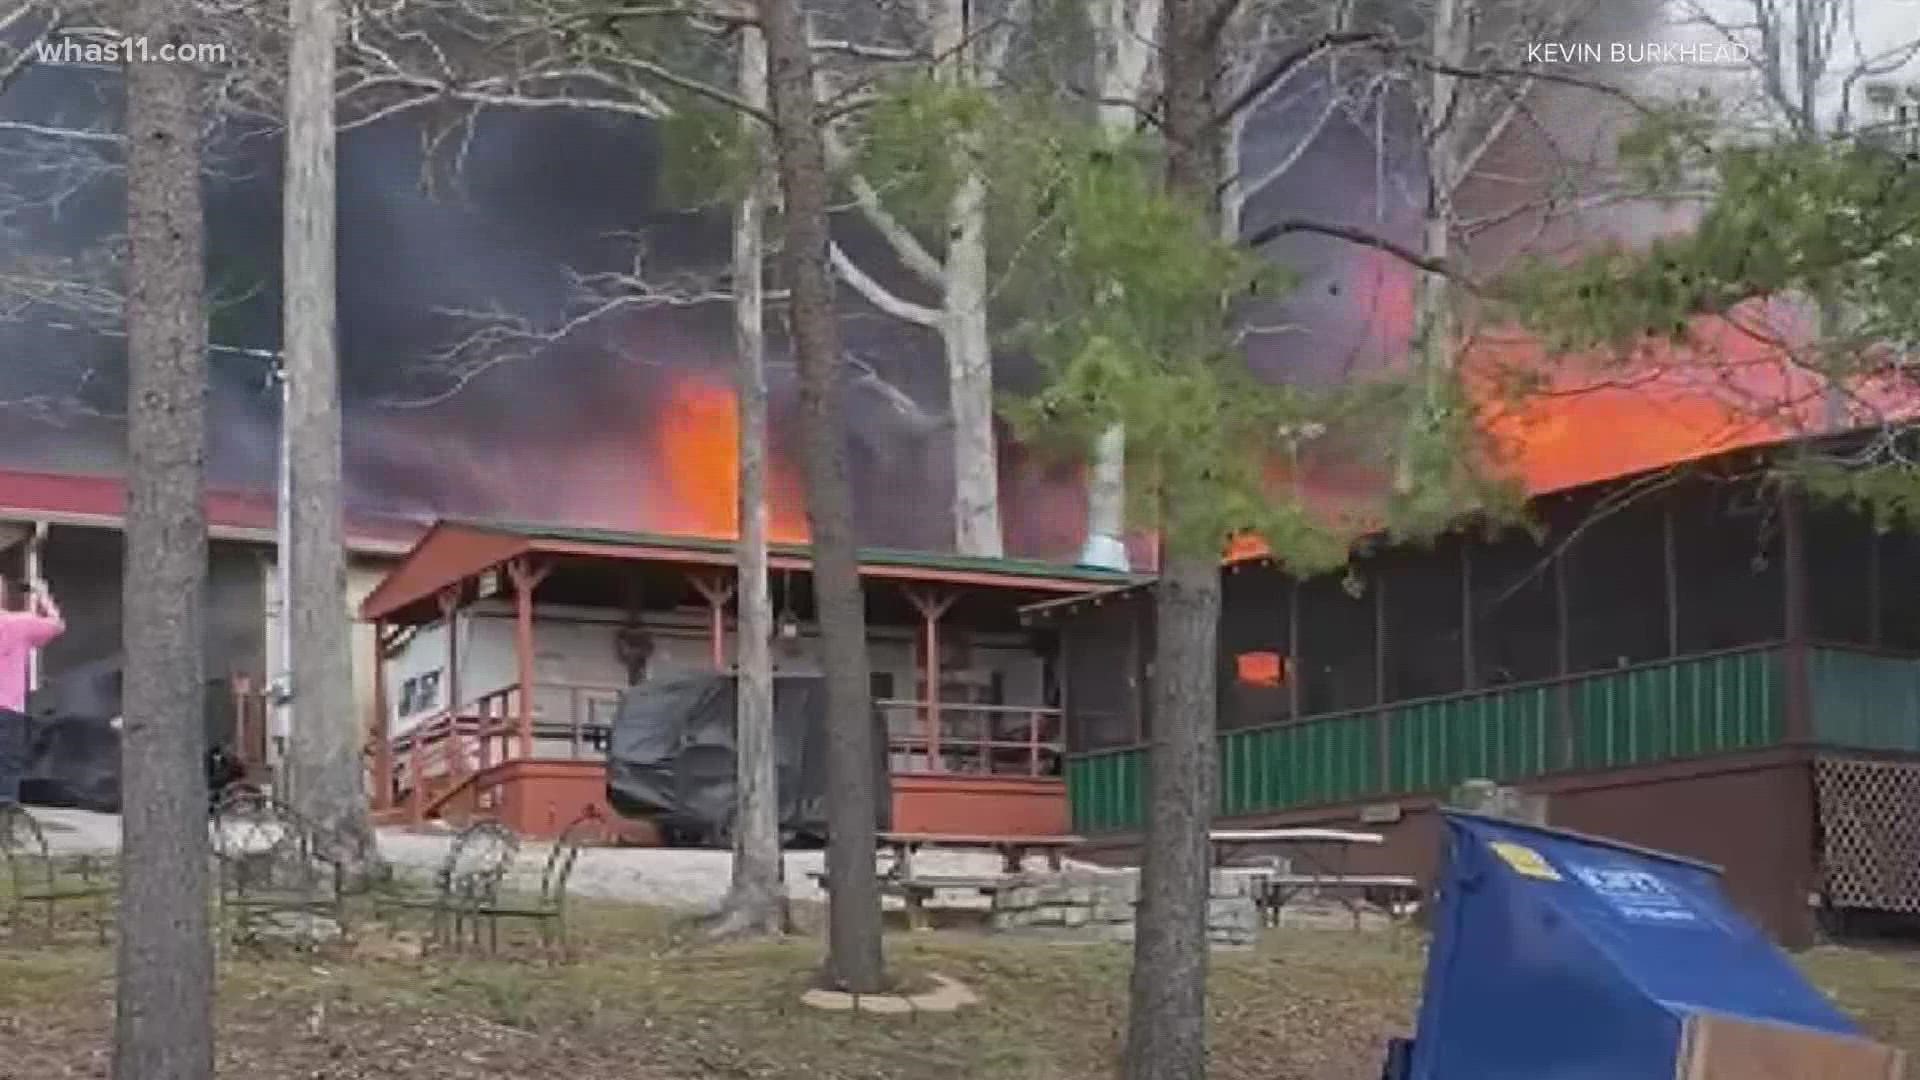 The fire at Nolin Lake destroyed at least seven cottages according to eyewitness Kevin Burkhead.